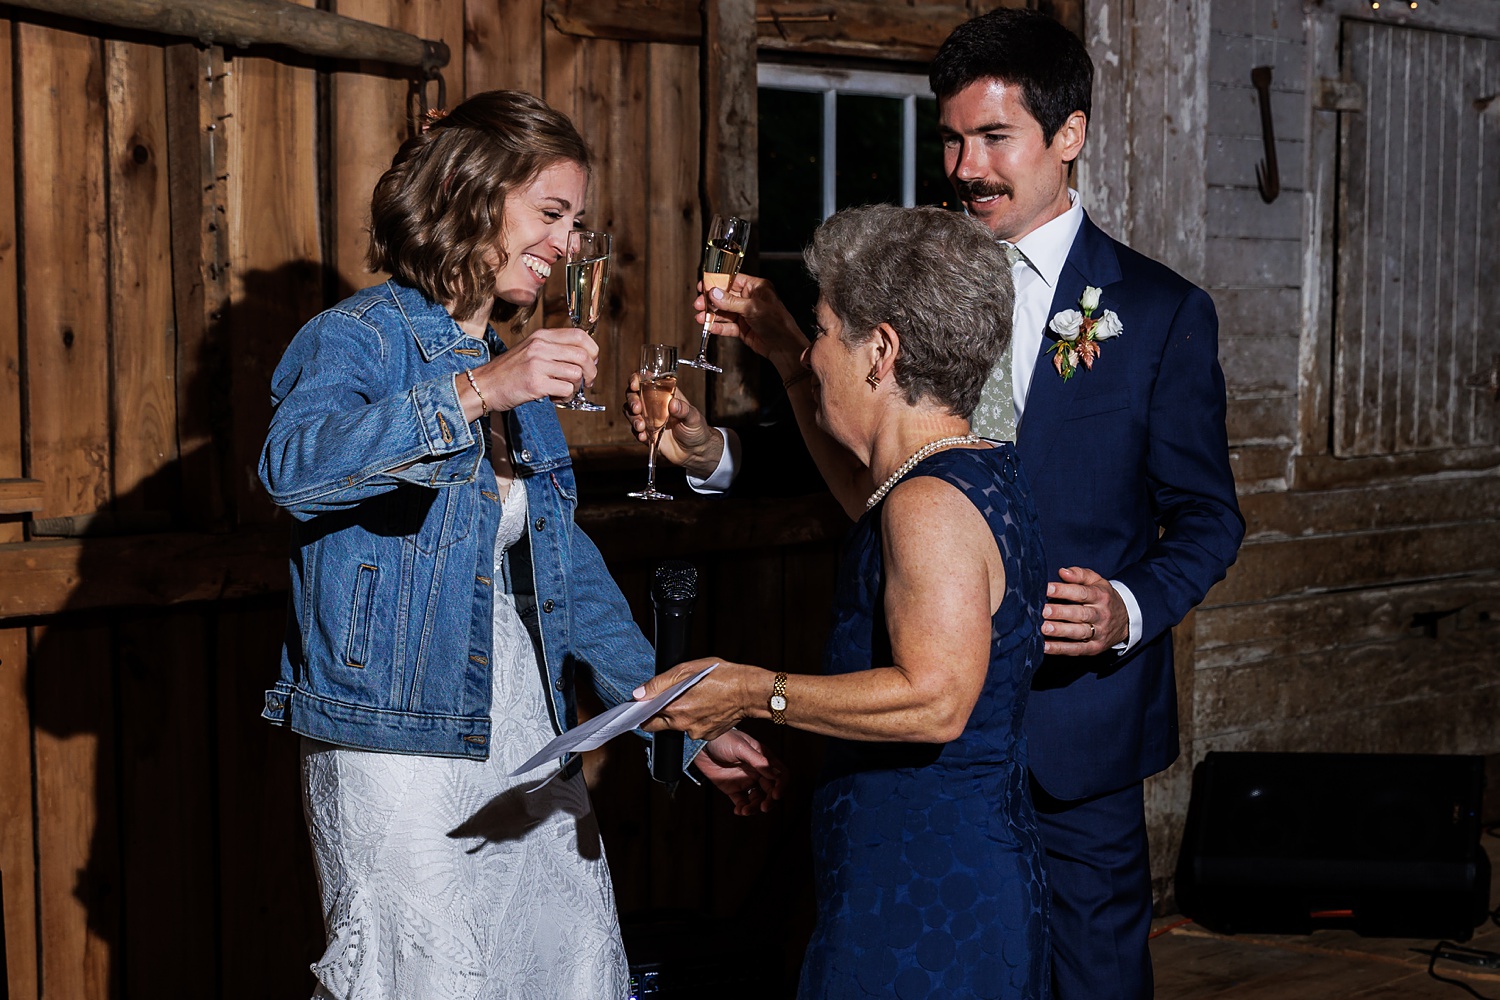 Embracing loved ones after toasts